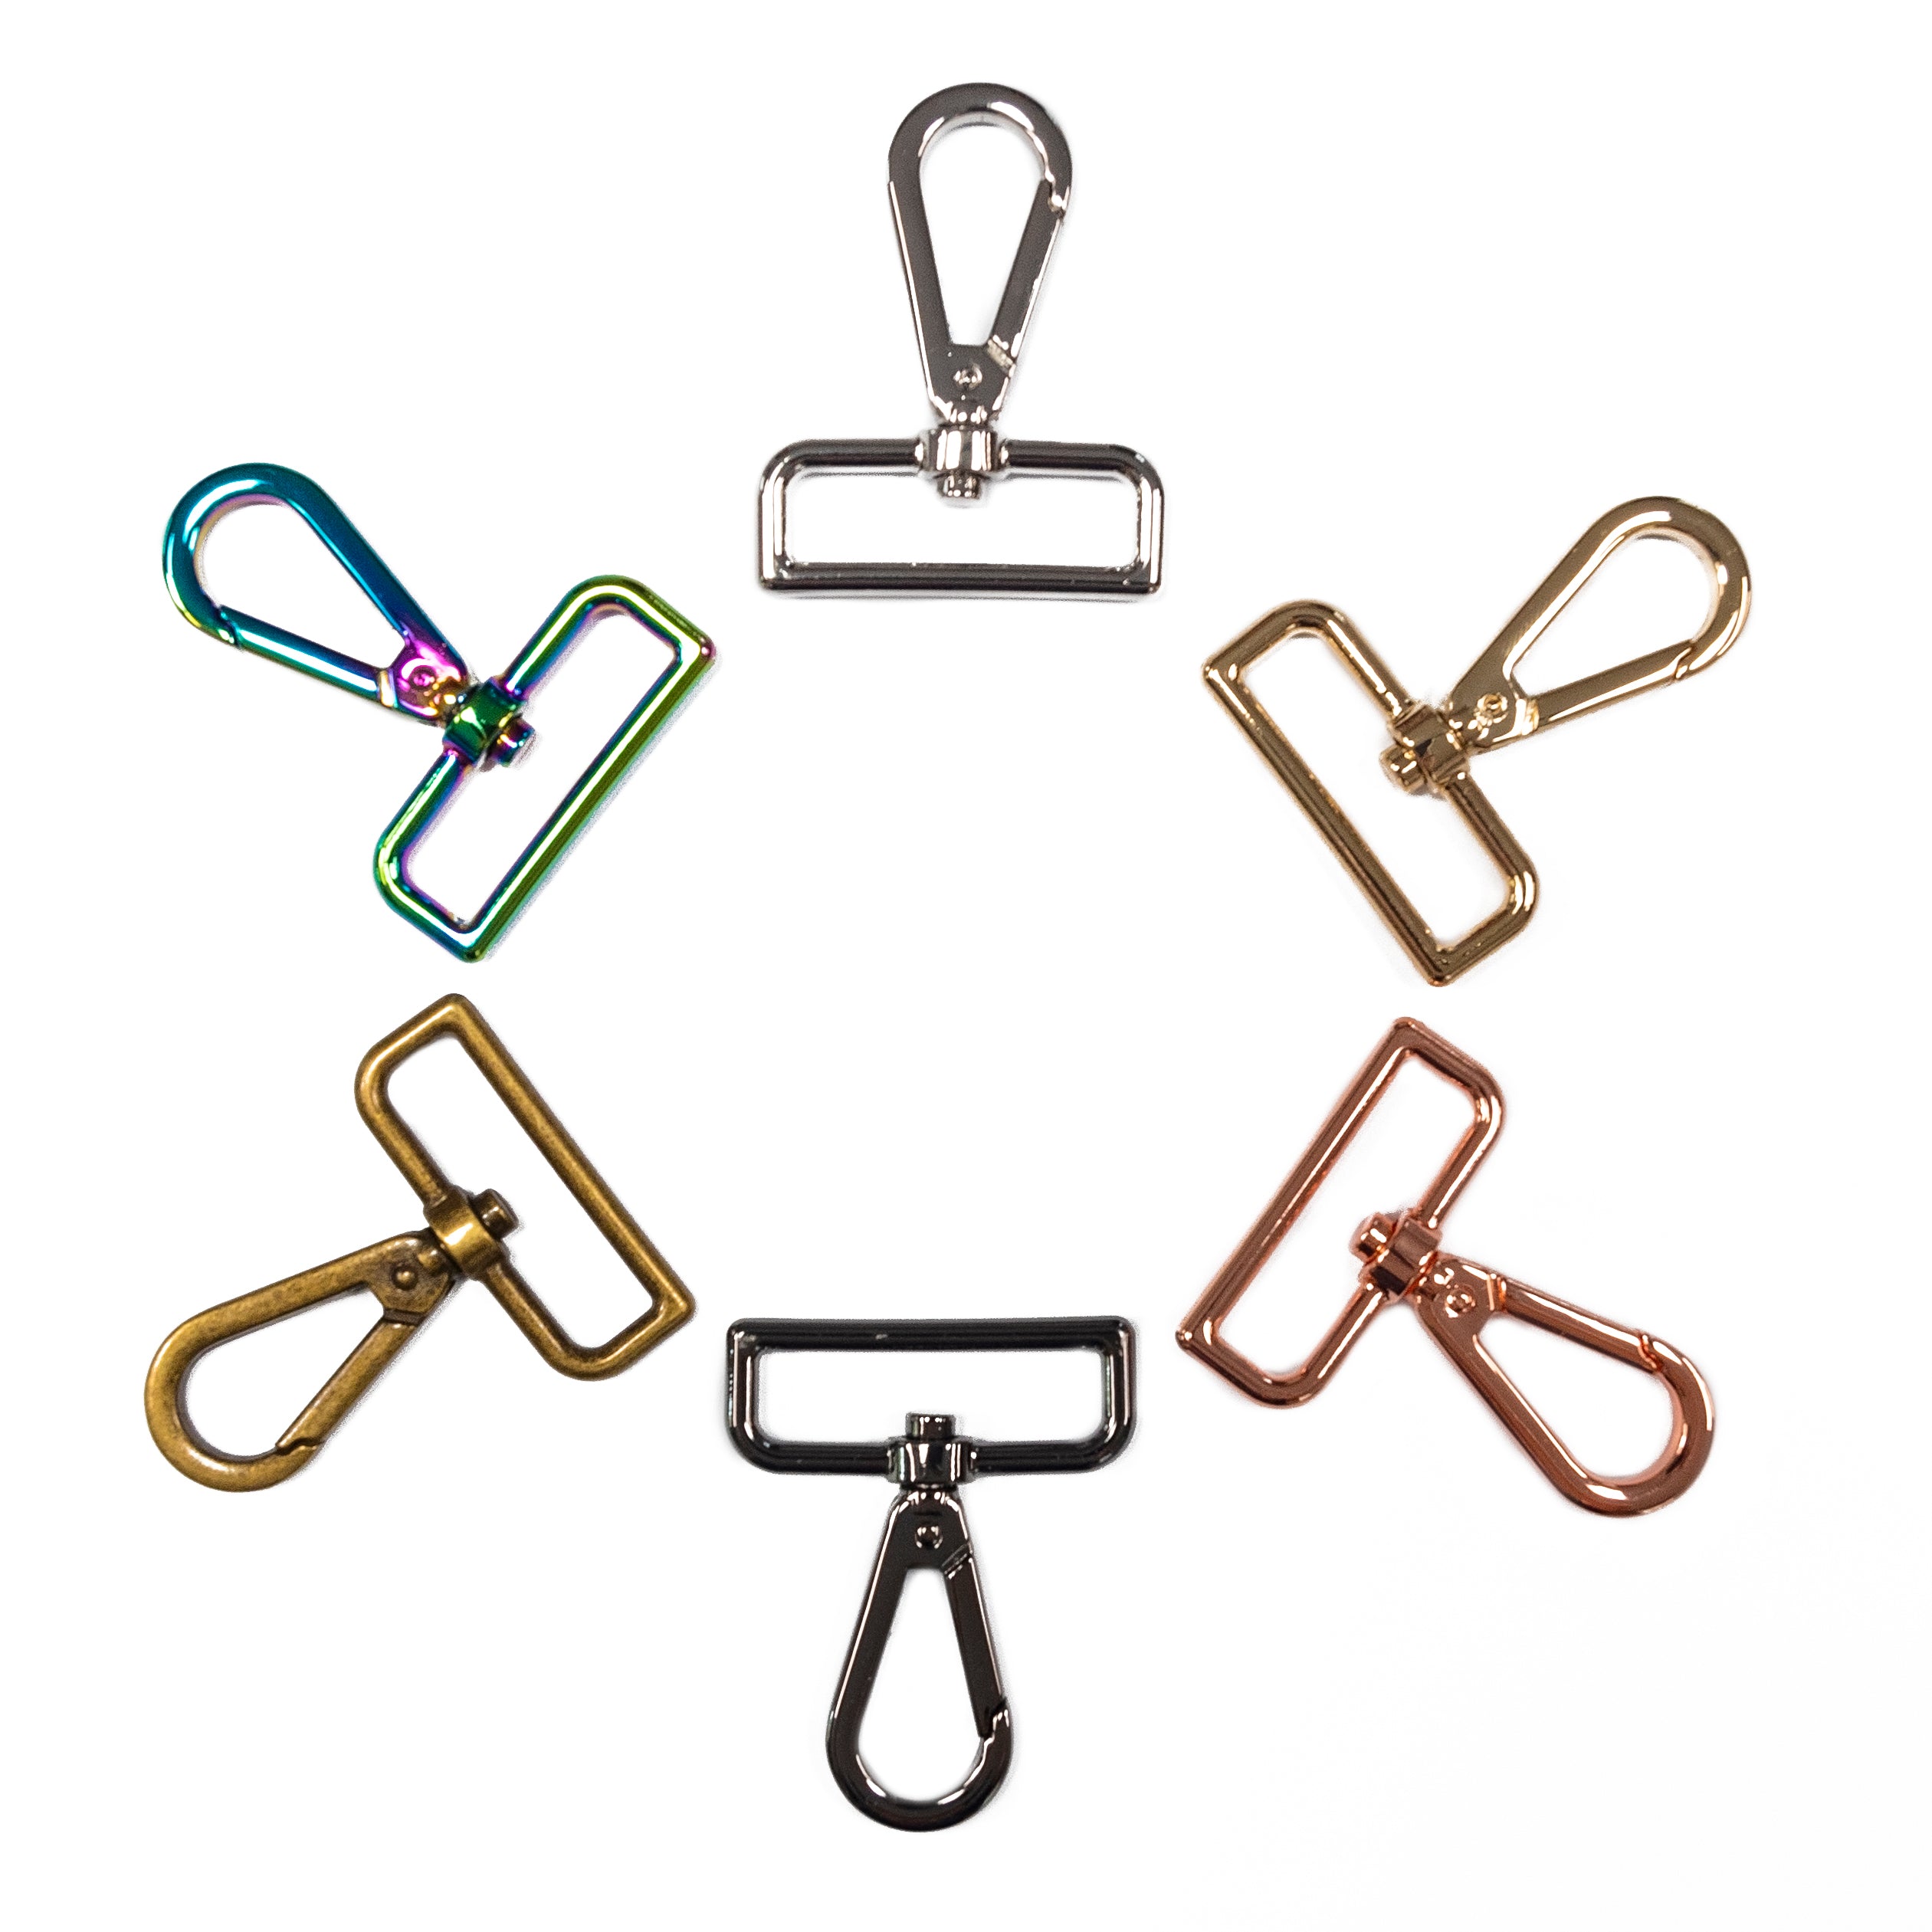 1/2 Snap Hooks with D-Rings - 6 Pack - Royal Upholstery